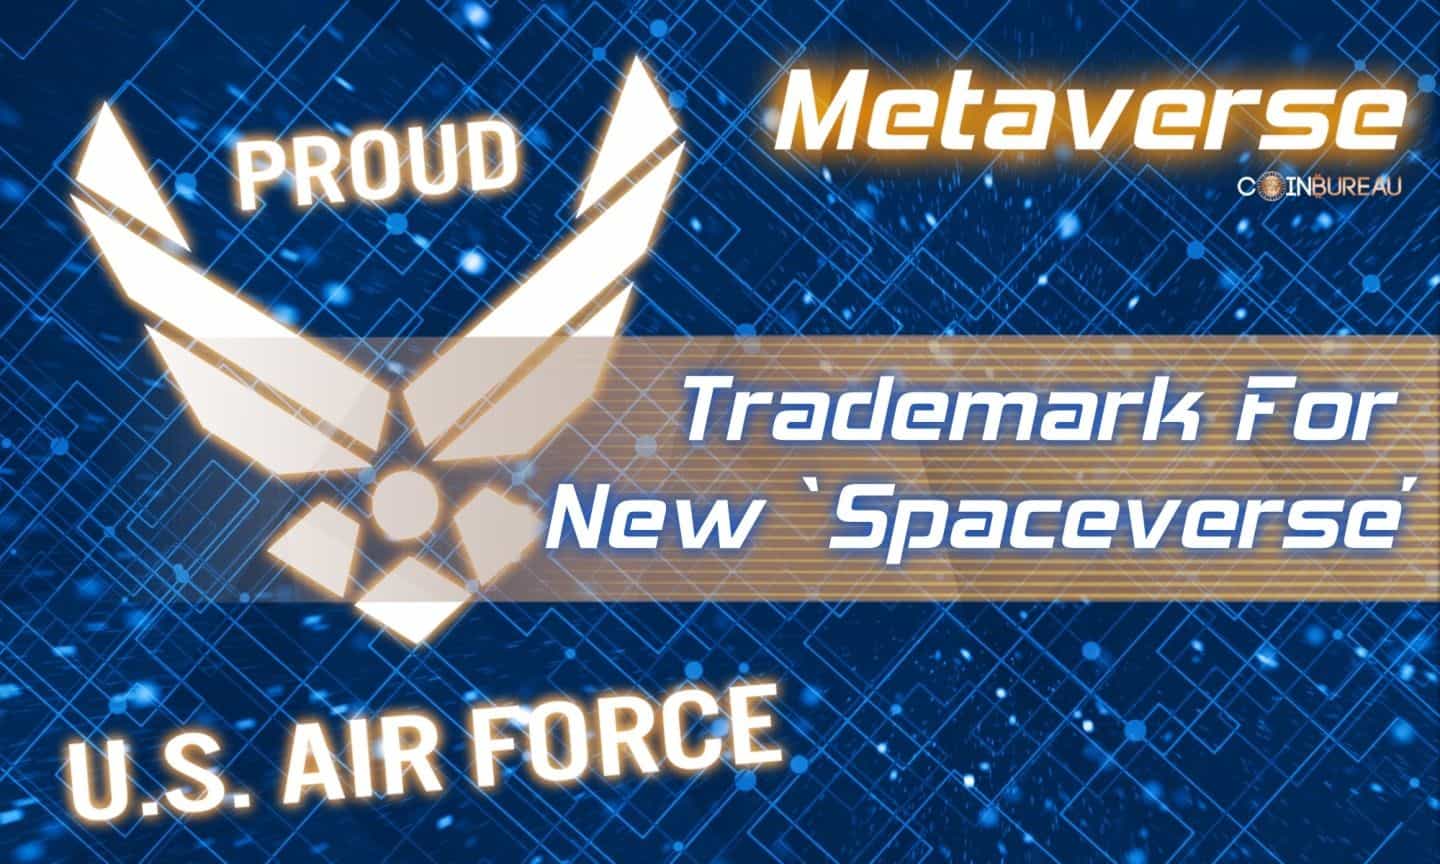 US Air Force Files Trademark For New ‘Spaceverse’ Metaverse Technology